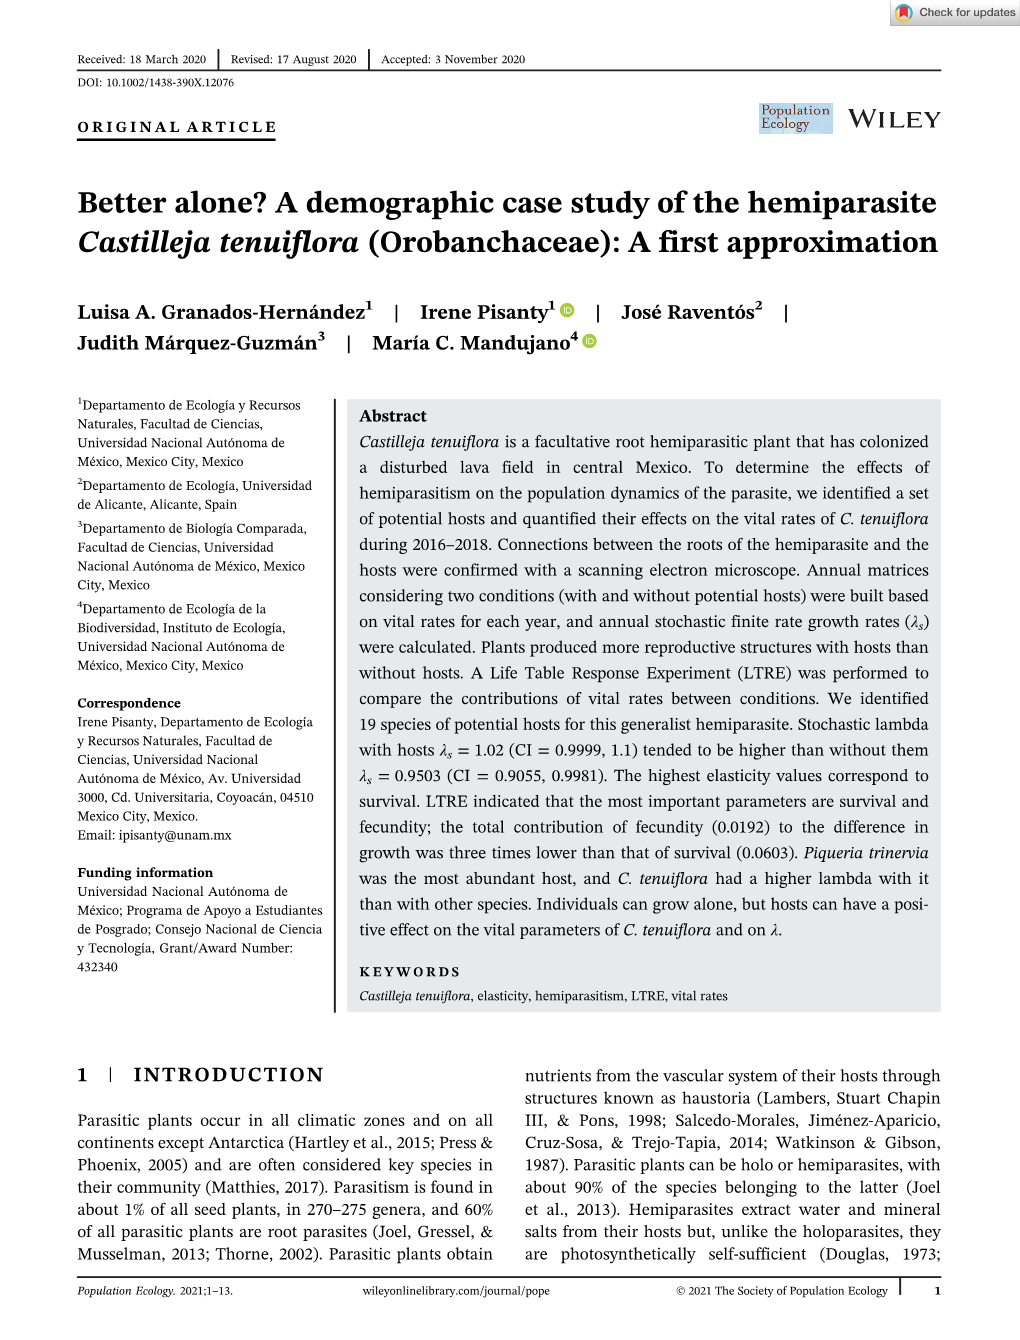 Better Alone? a Demographic Case Study of the Hemiparasite Castilleja Tenuiflora (Orobanchaceae): a First Approximation